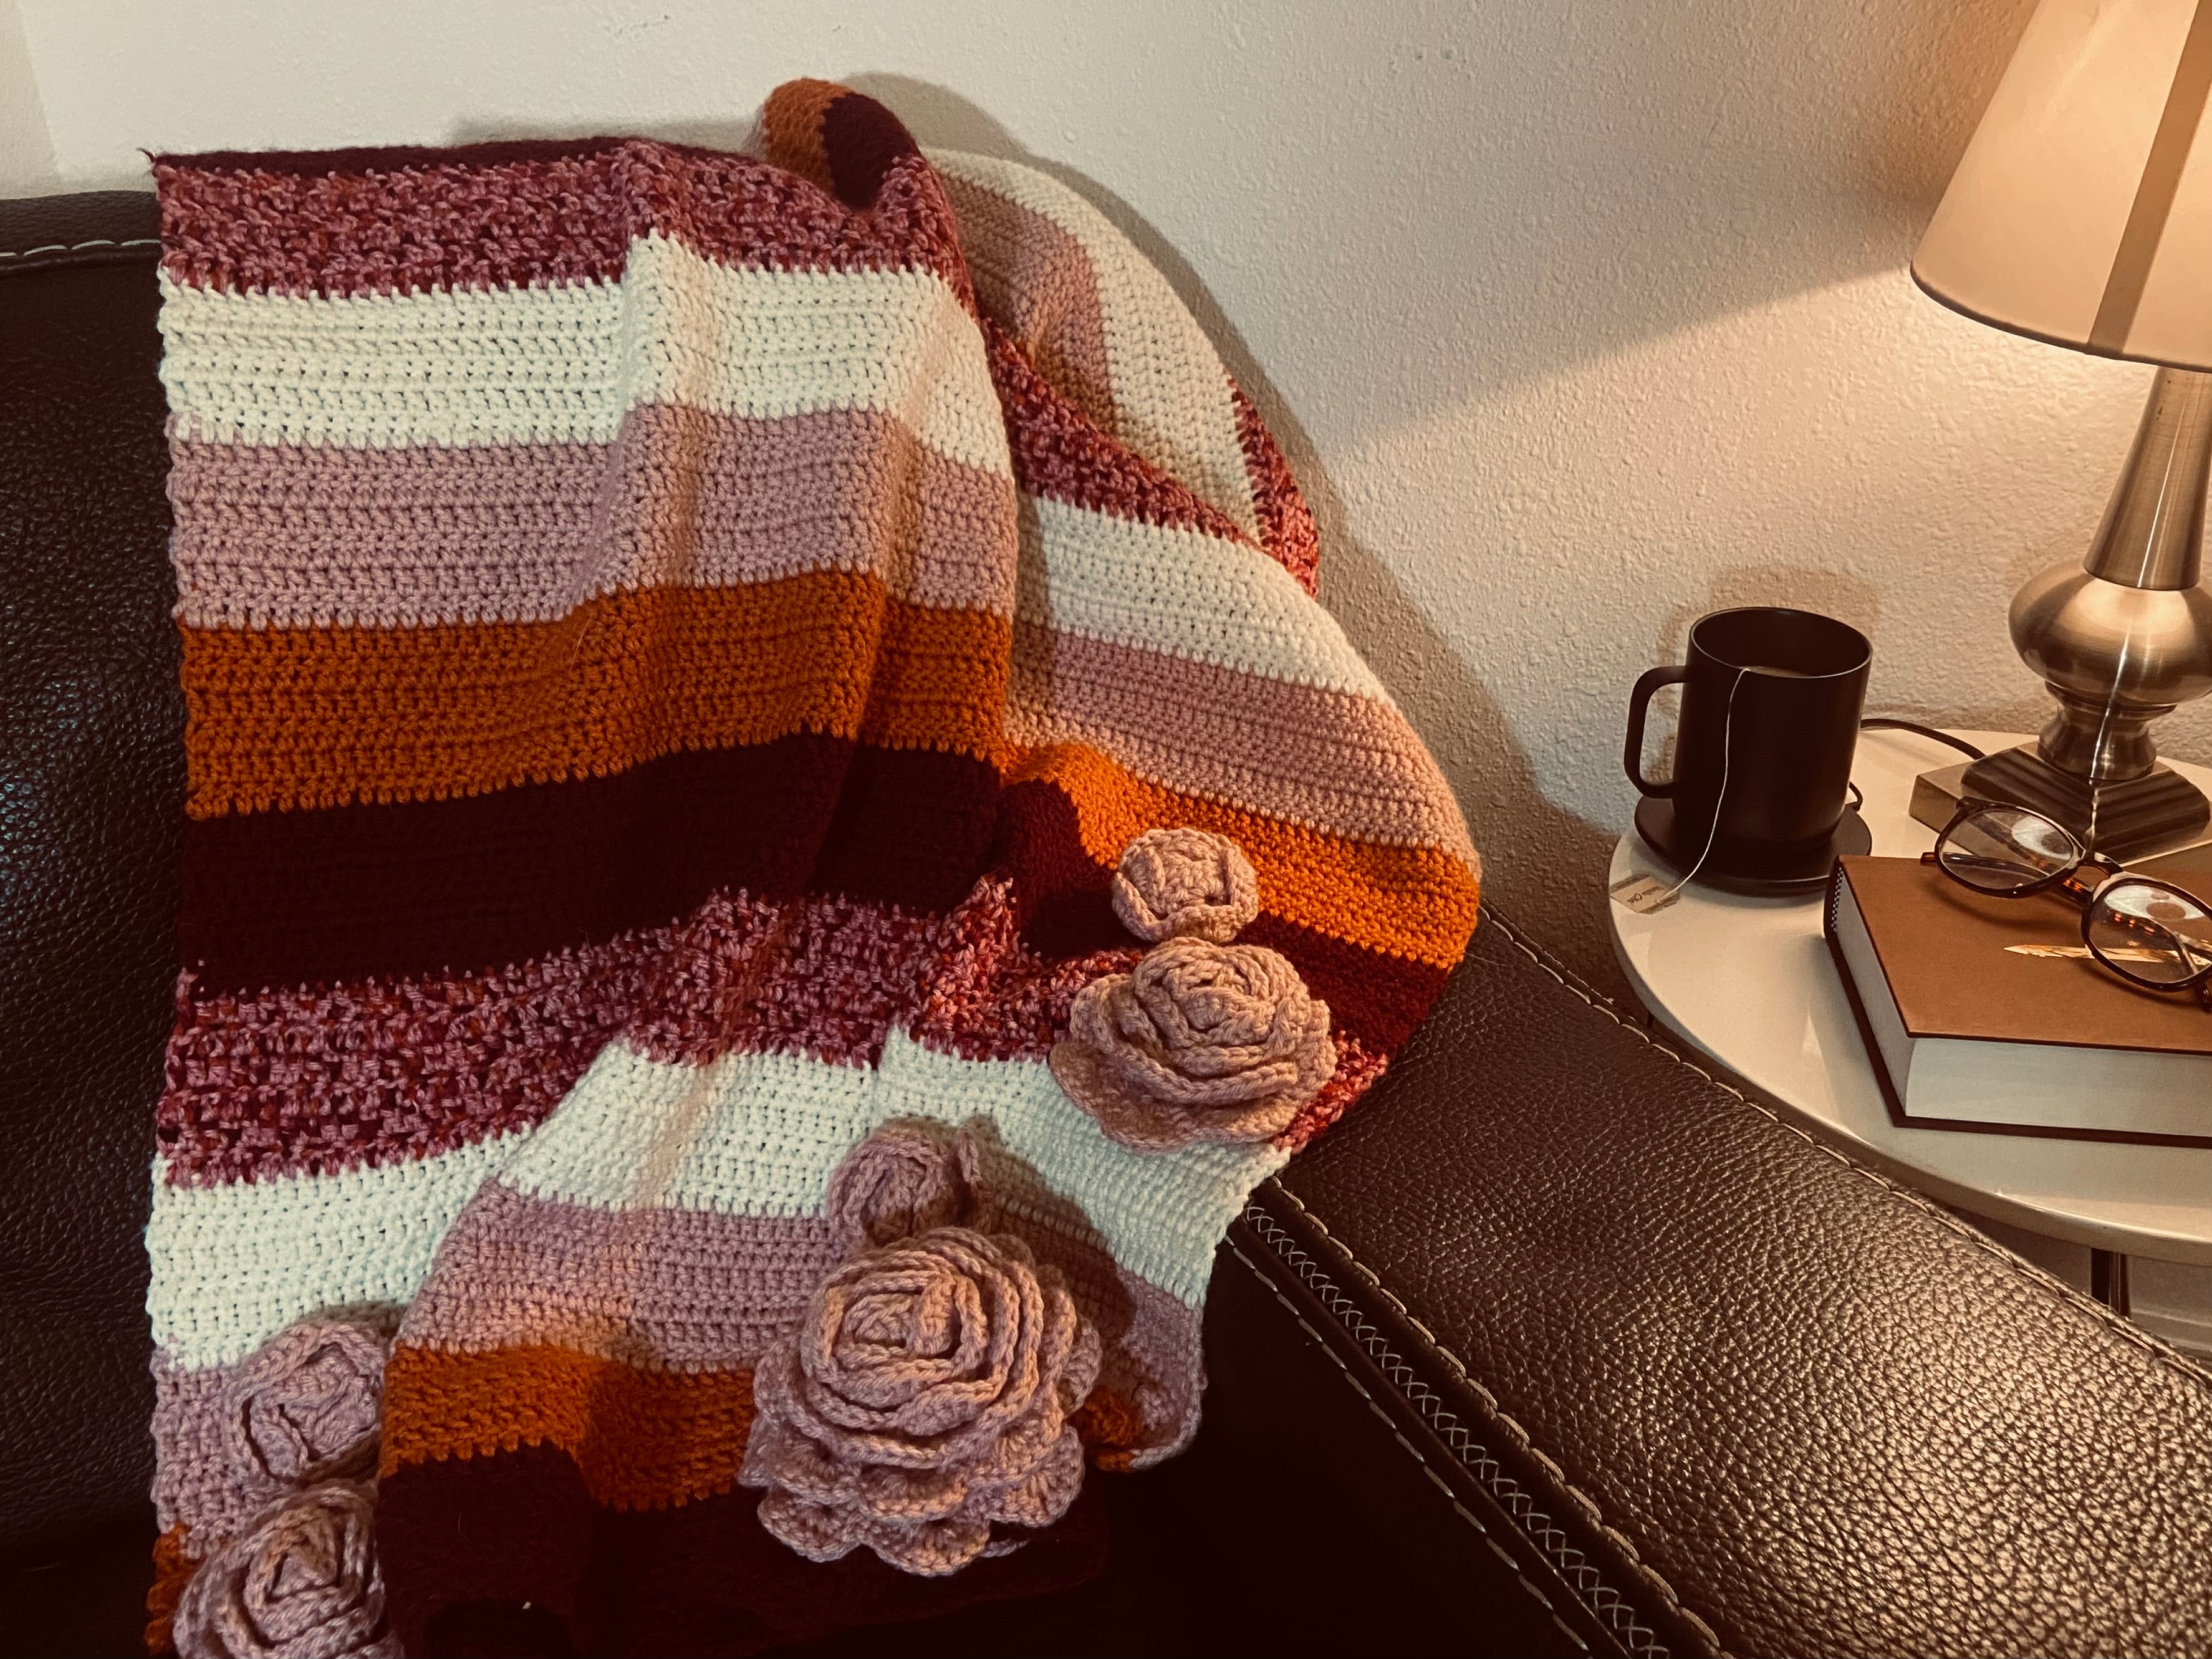 crochet blanket with stripes of orange, burgundy, pink, and white with pink crochet flowers draped over leather chair 